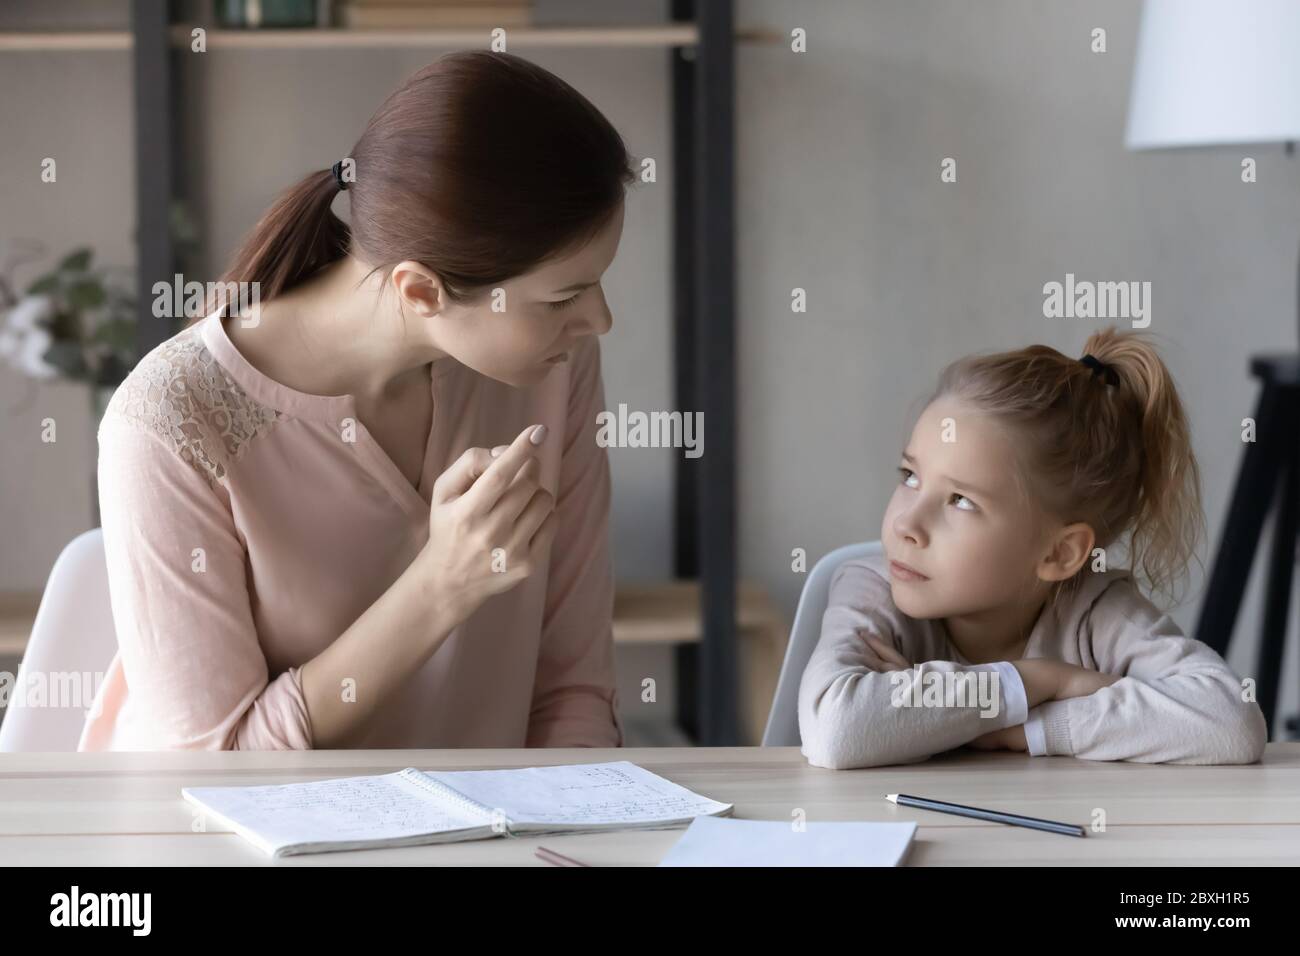 Strict mother scold schoolgirl daughter for bad marks Stock Photo